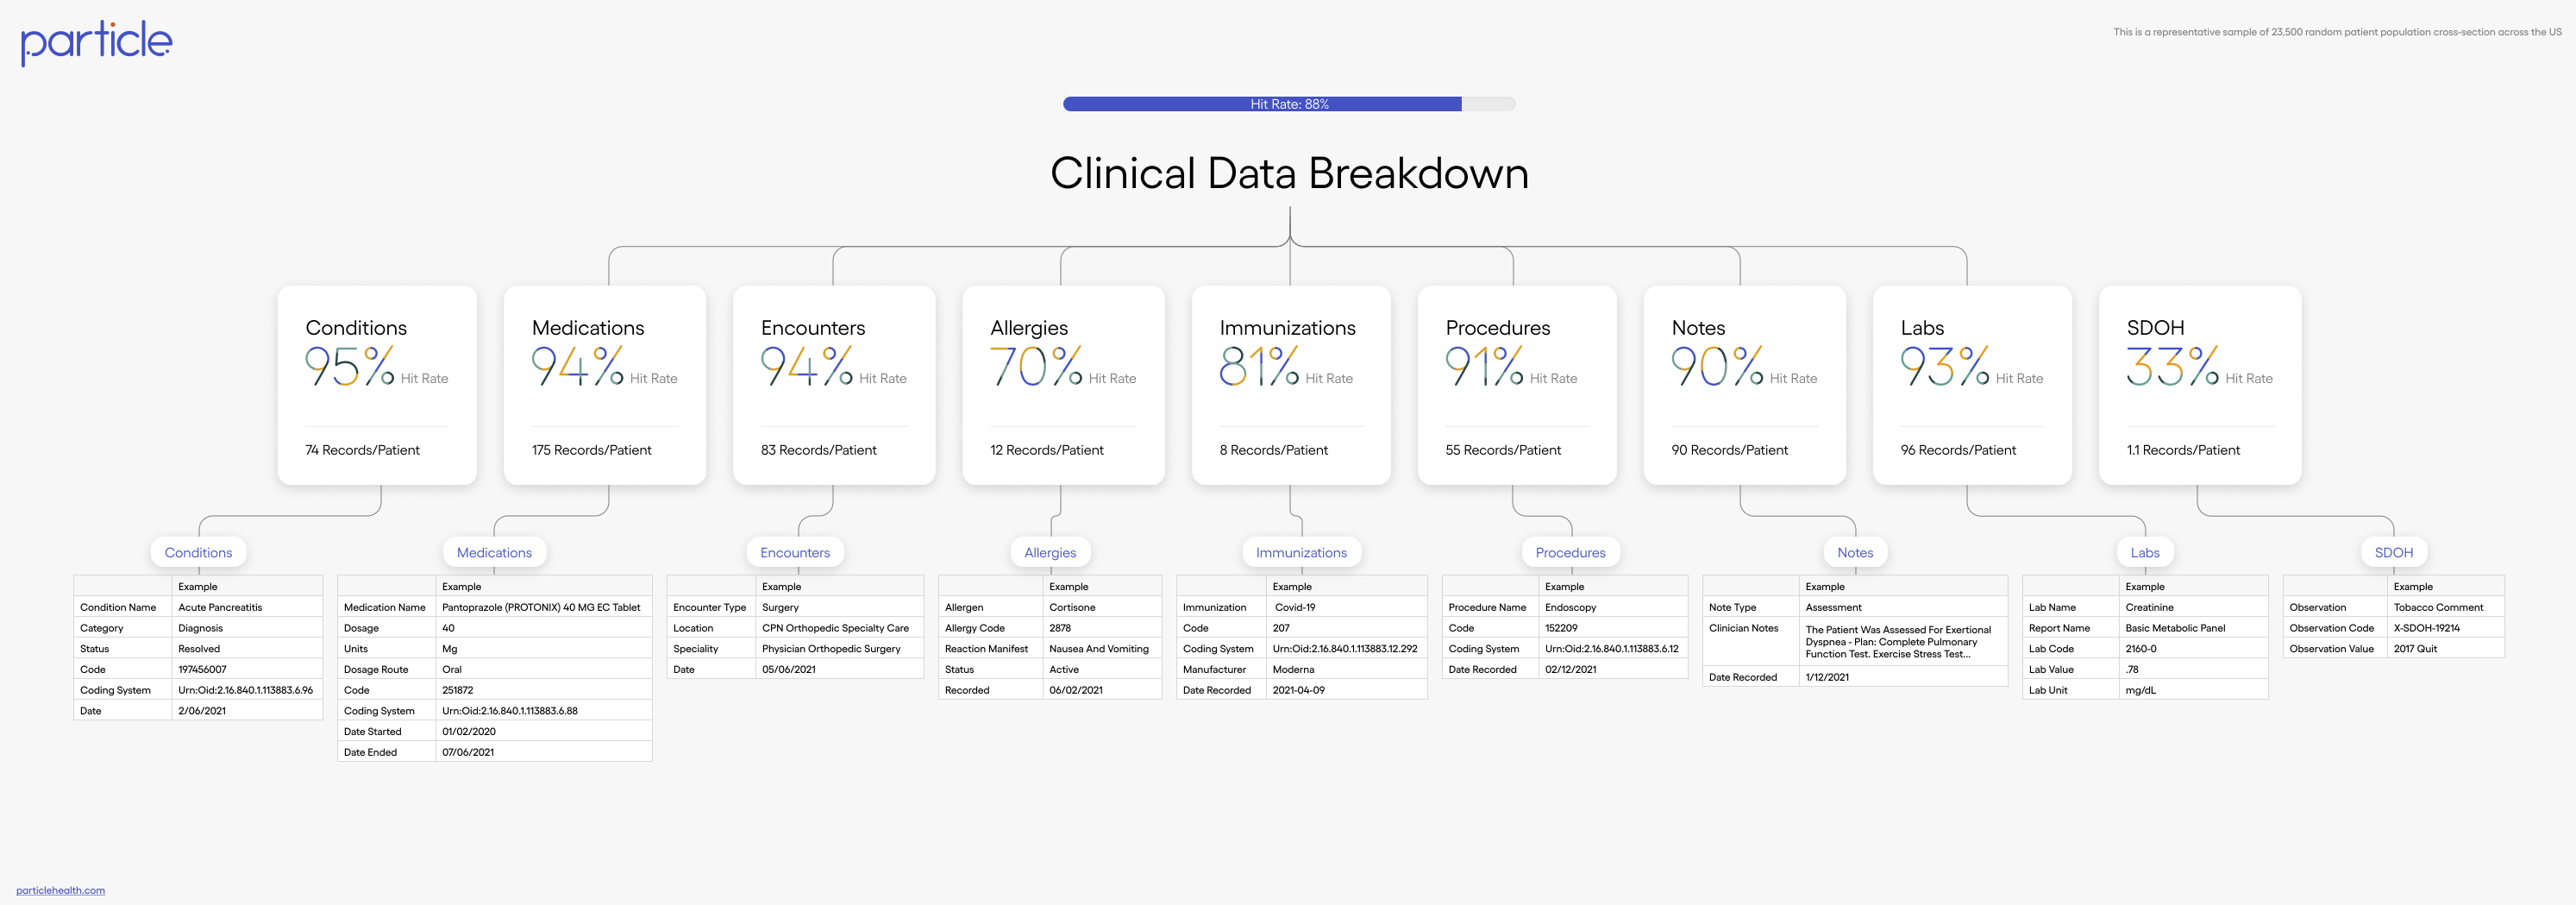 Interoperability: Particle Health Launches Suite of Solutions to Wrangle Data